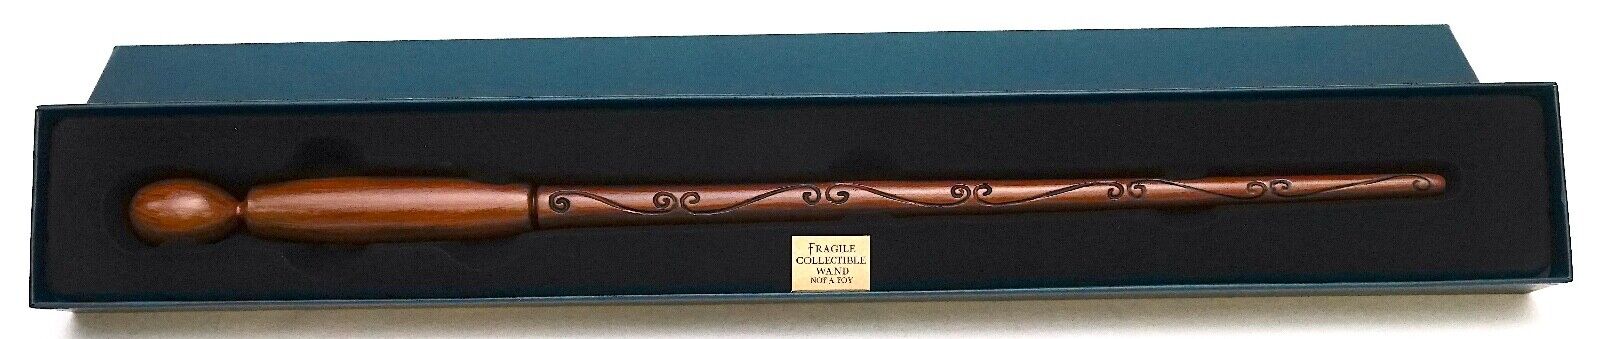 New Universal Wizarding World Of Harry Potter Brown Death Eater Collectible Wand